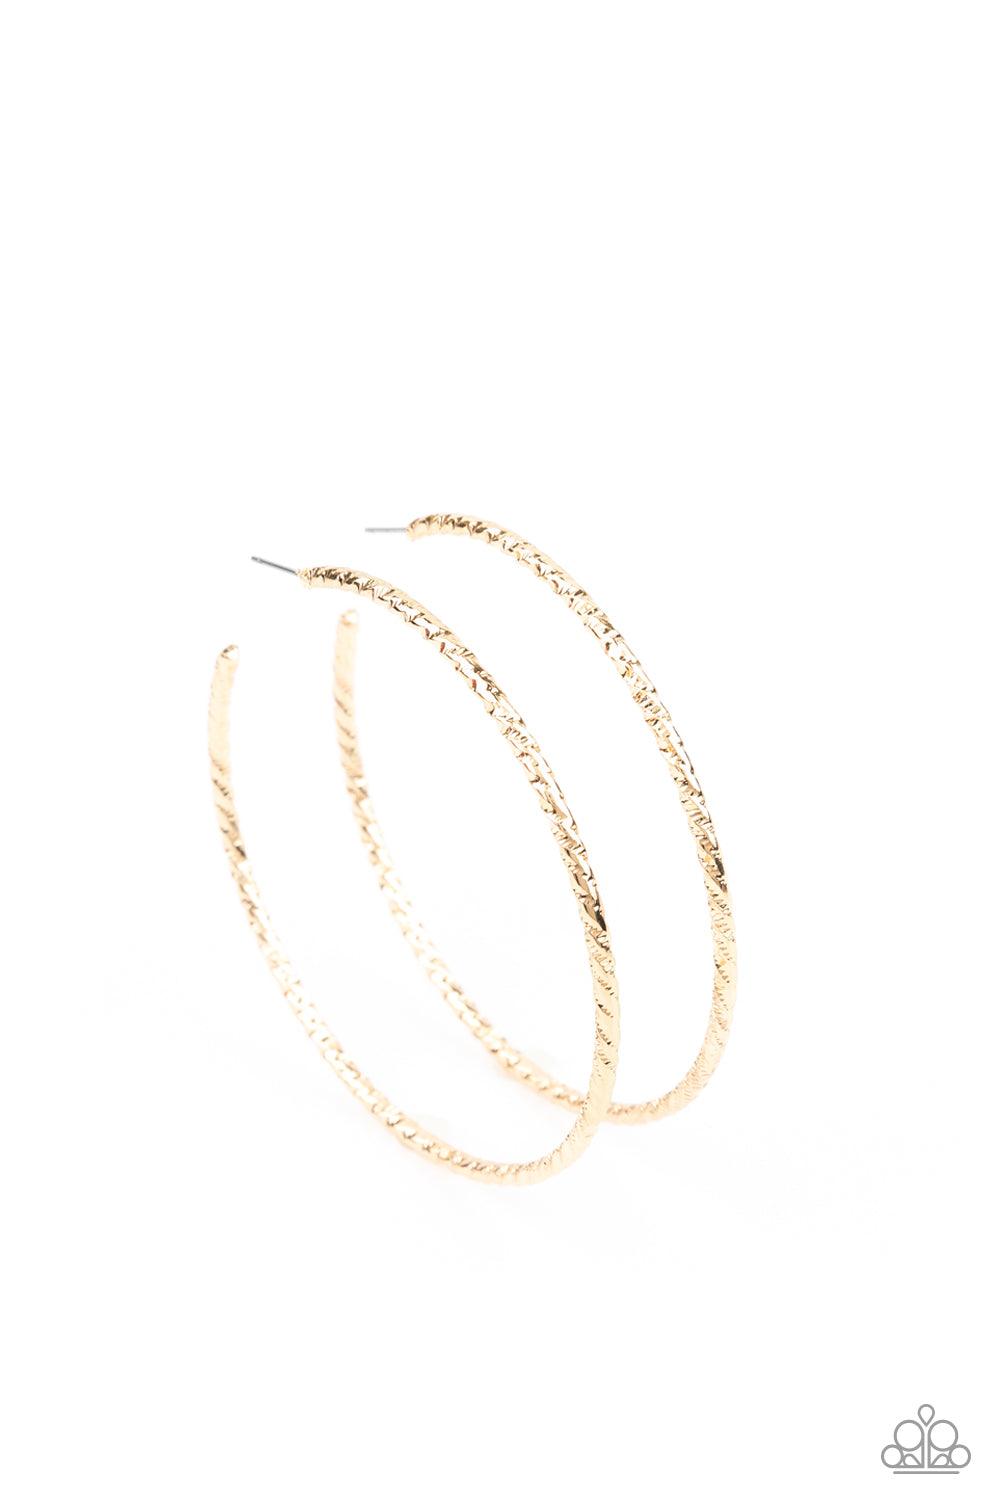 Paparazzi Accessories Voluptuous Volume - Gold Etched in twisted diamond-cut texture, an oversized gold bar delicately curls into a dramatically oversized hoop. Earring attaches to a standard post fitting. Hoop measures approximately 2 1/2" in diameter. S